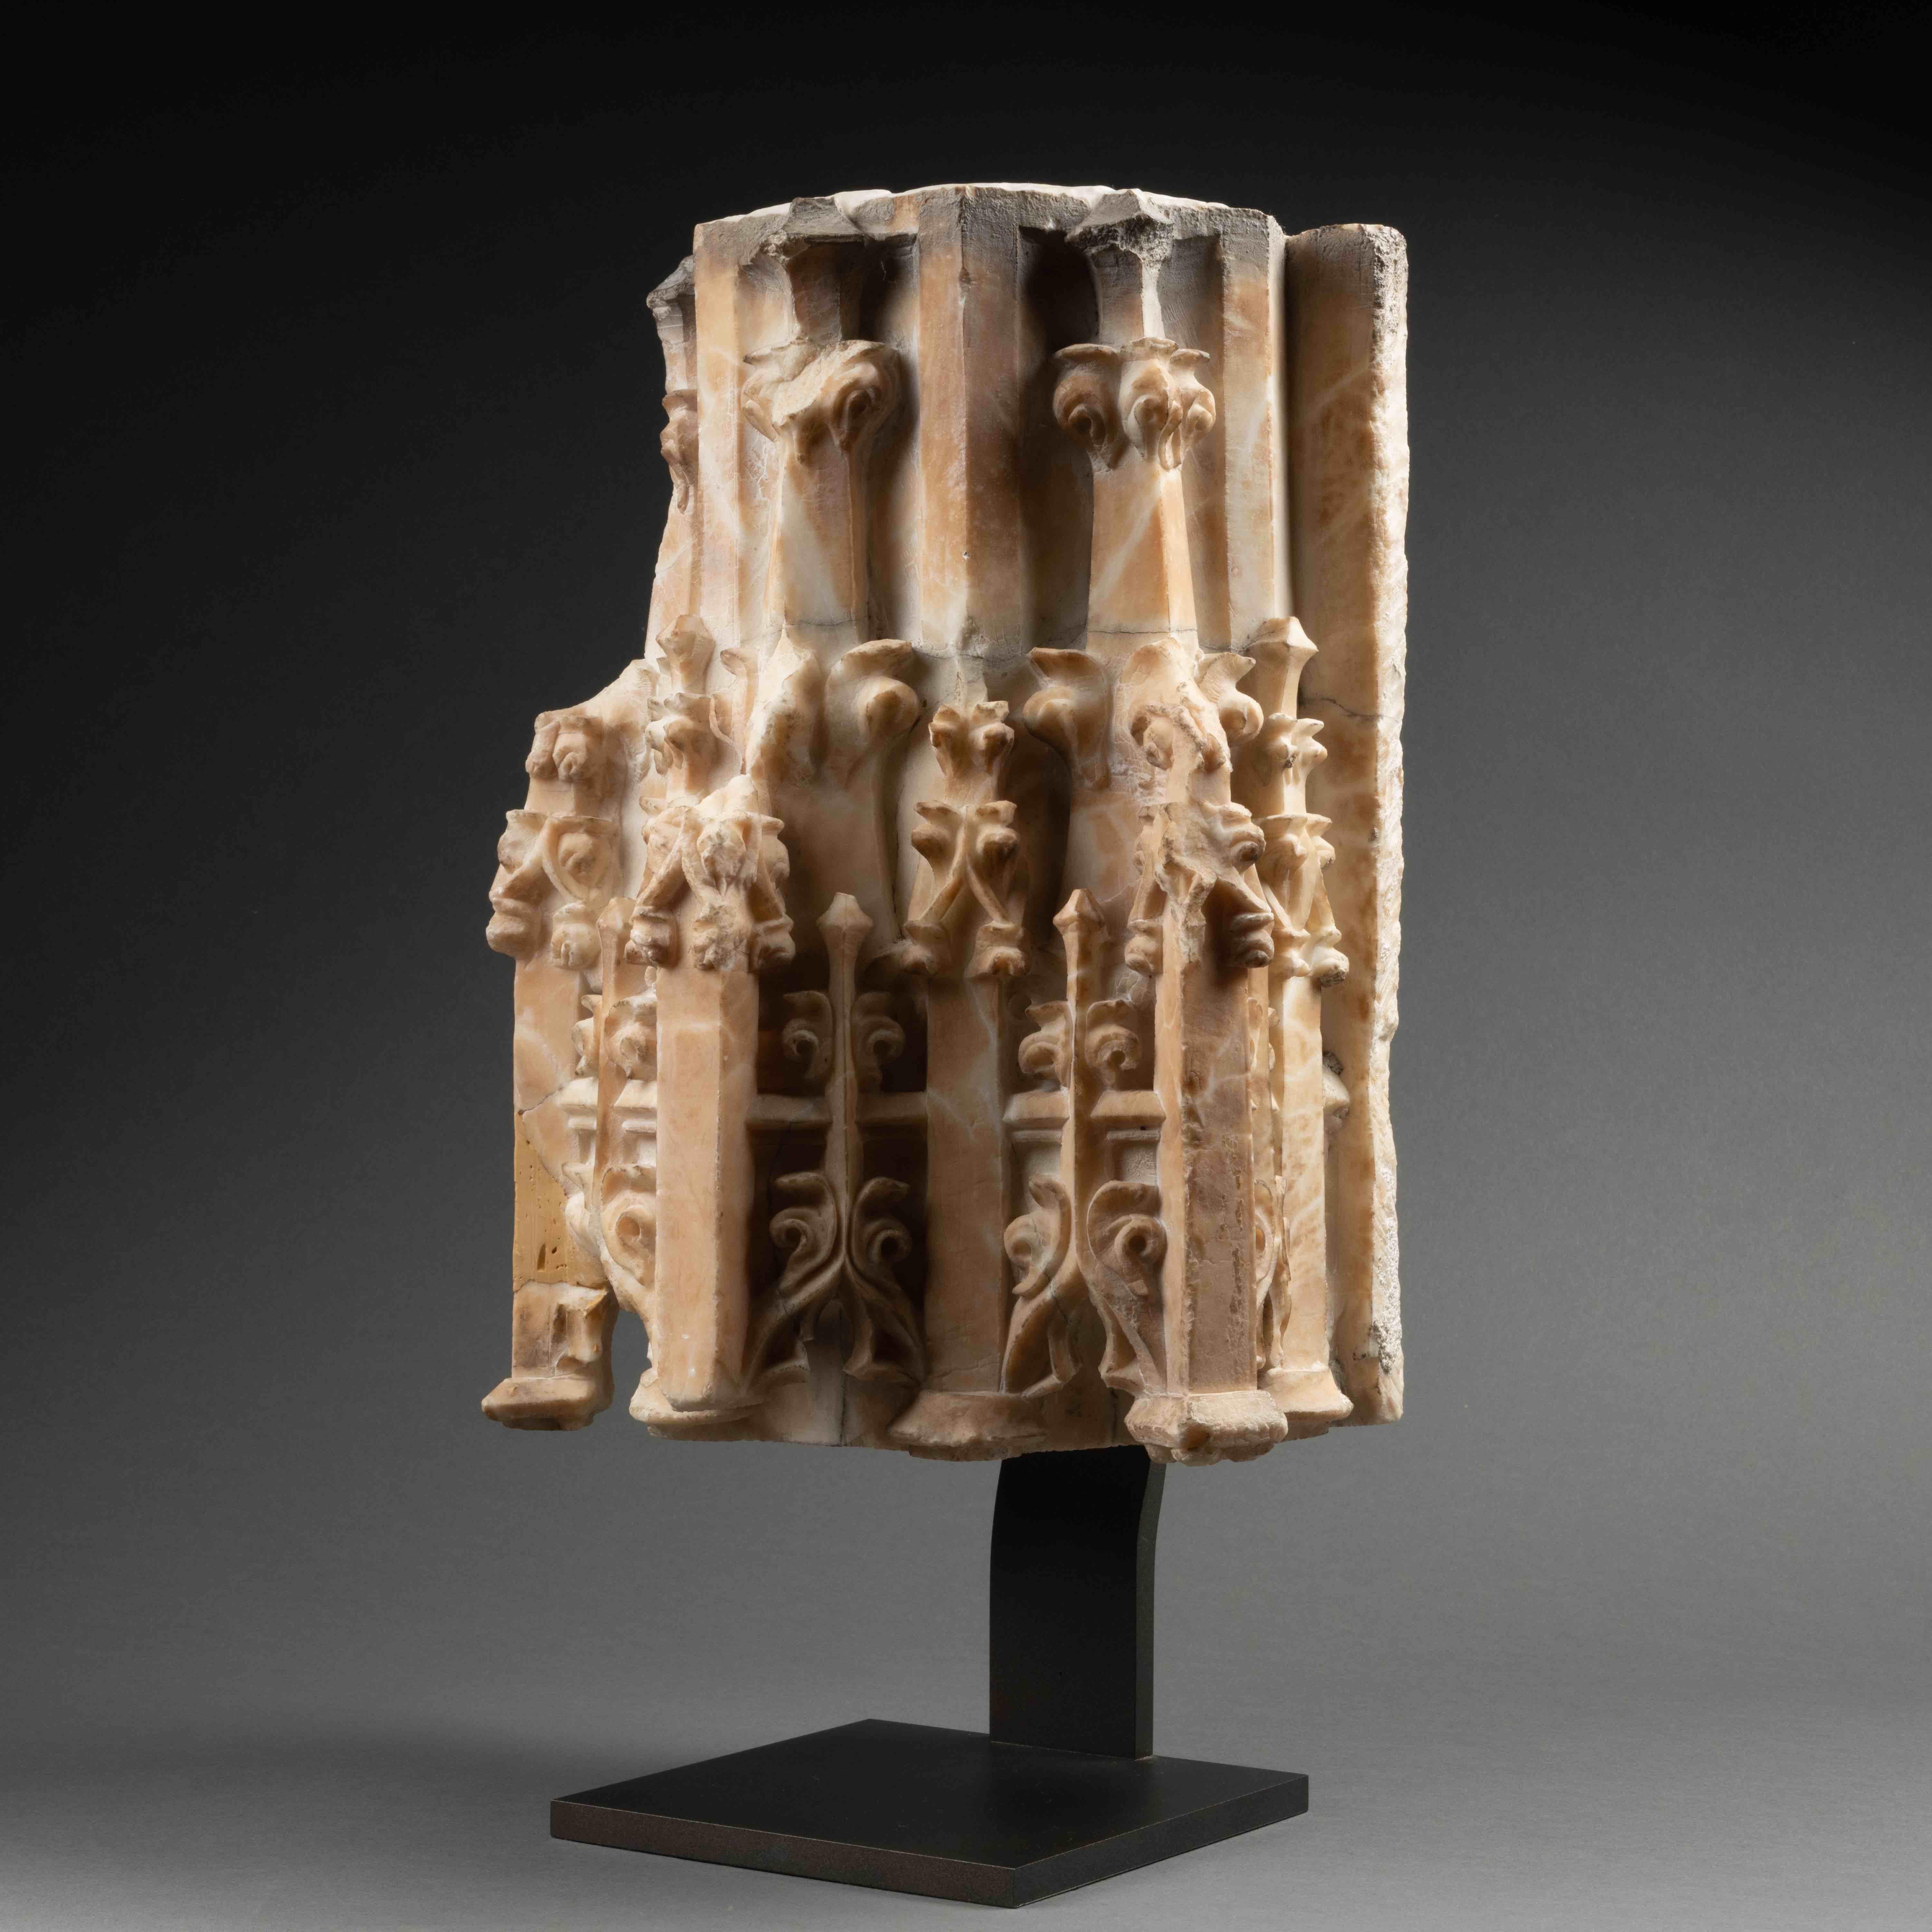 Gothic canopy
France, 15th century
Alabaster, some traces of polychromy
33 x 23 x 20 cm

Provenance:
- Private collection Genève, Switzerland


This masterful, three-sided canopy is carved in the Flamboyant style, which first developed in